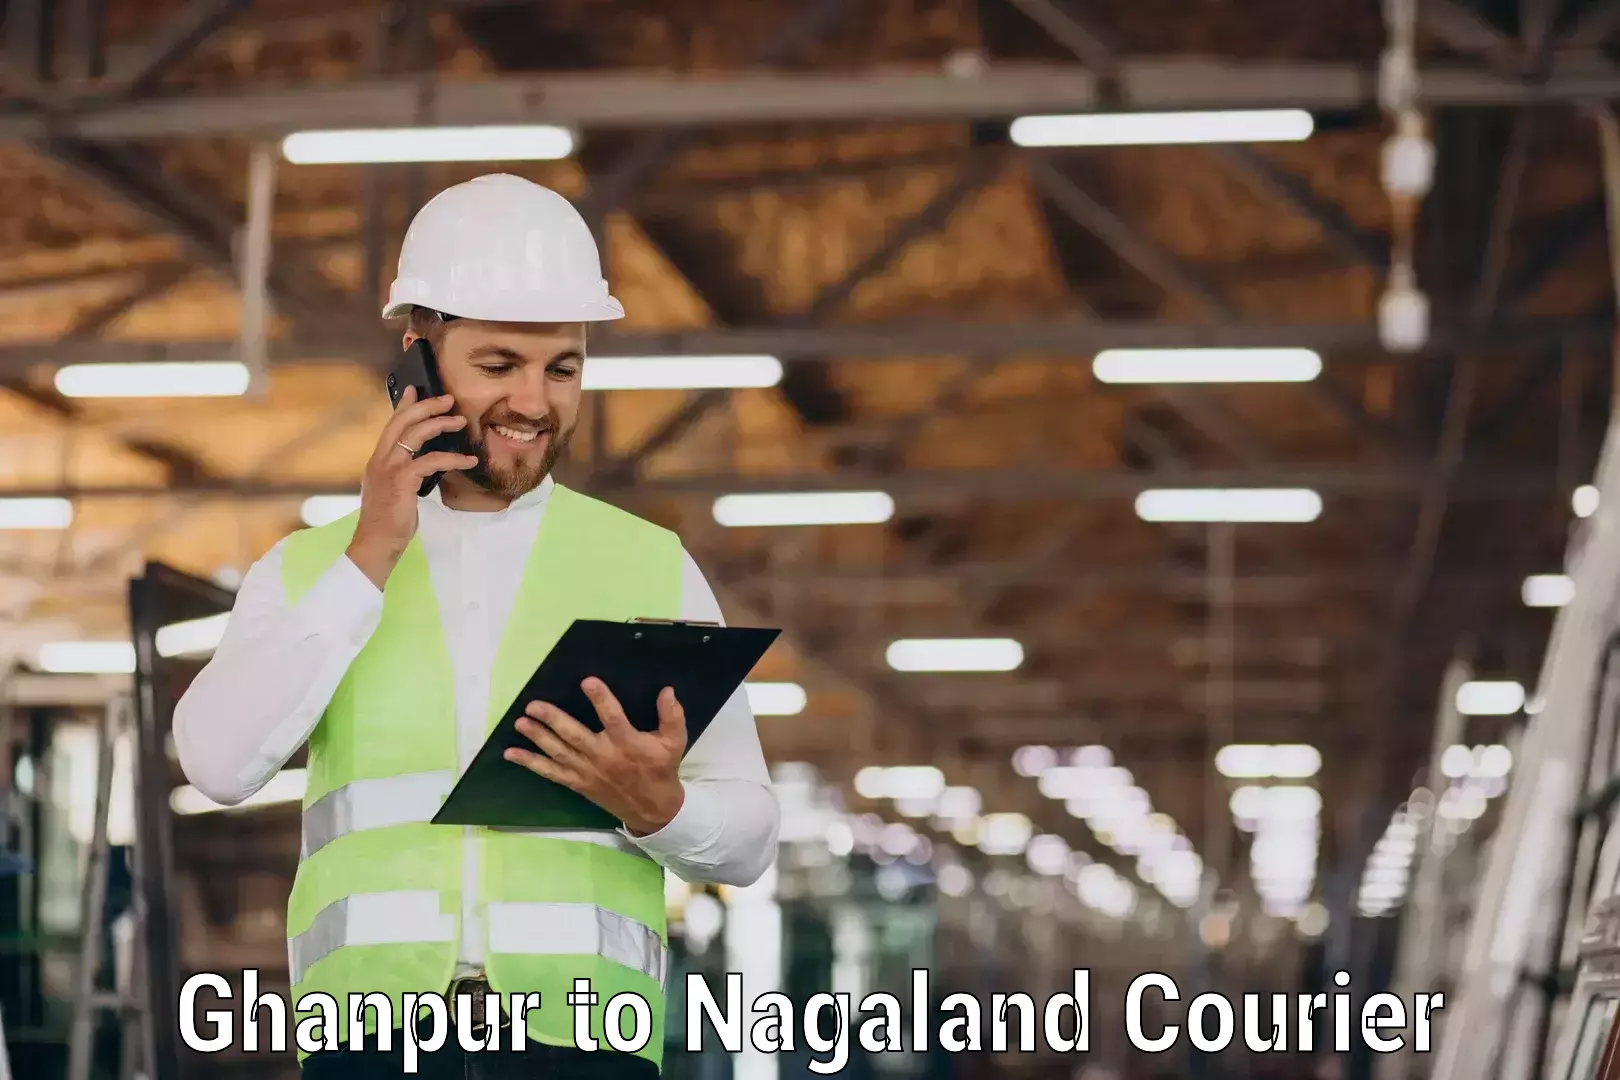 Online shipping calculator Ghanpur to Nagaland